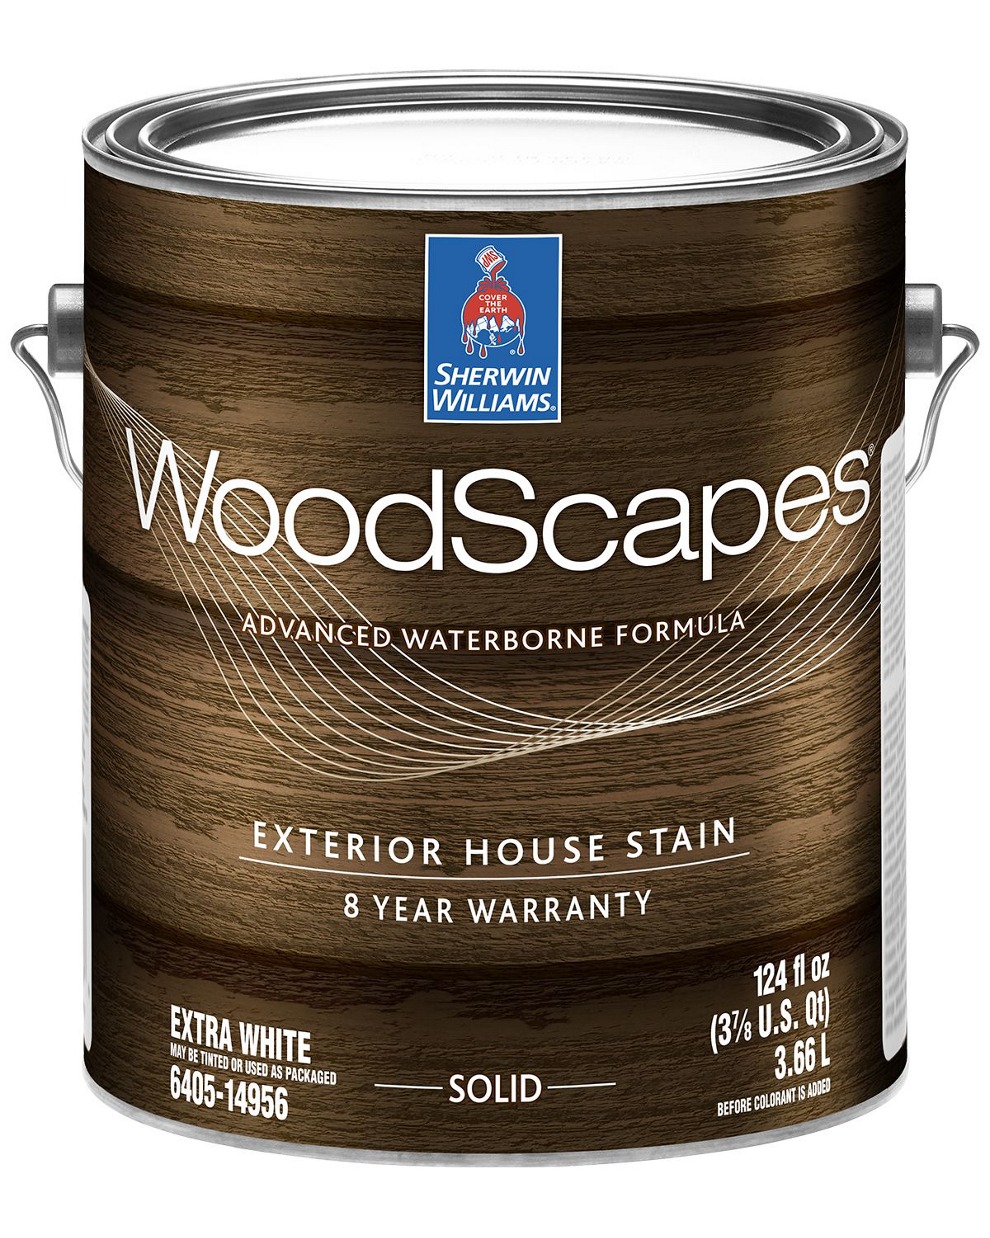 WoodScapes paint professionally applied by Meticulous Painting - Fall River, MA